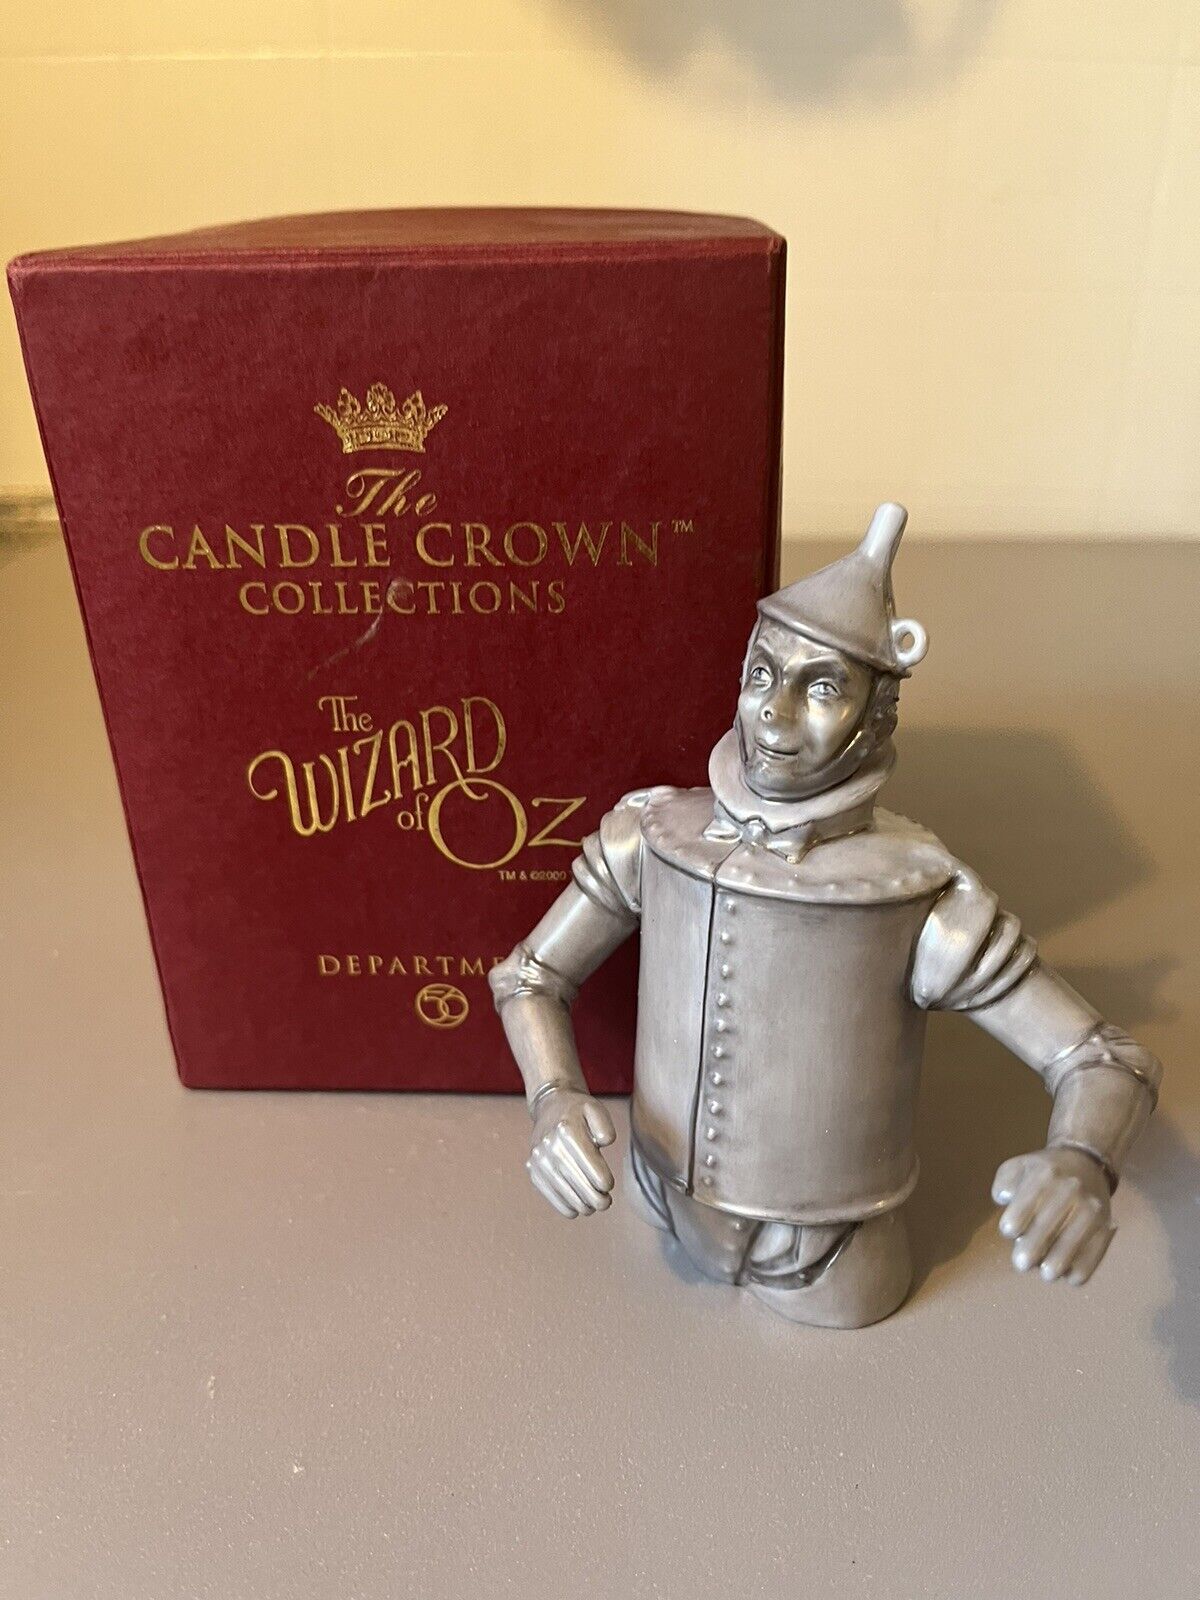 Department 56 Wizard Of Oz Tin Man The Candle Crown Collection Ornament 2000